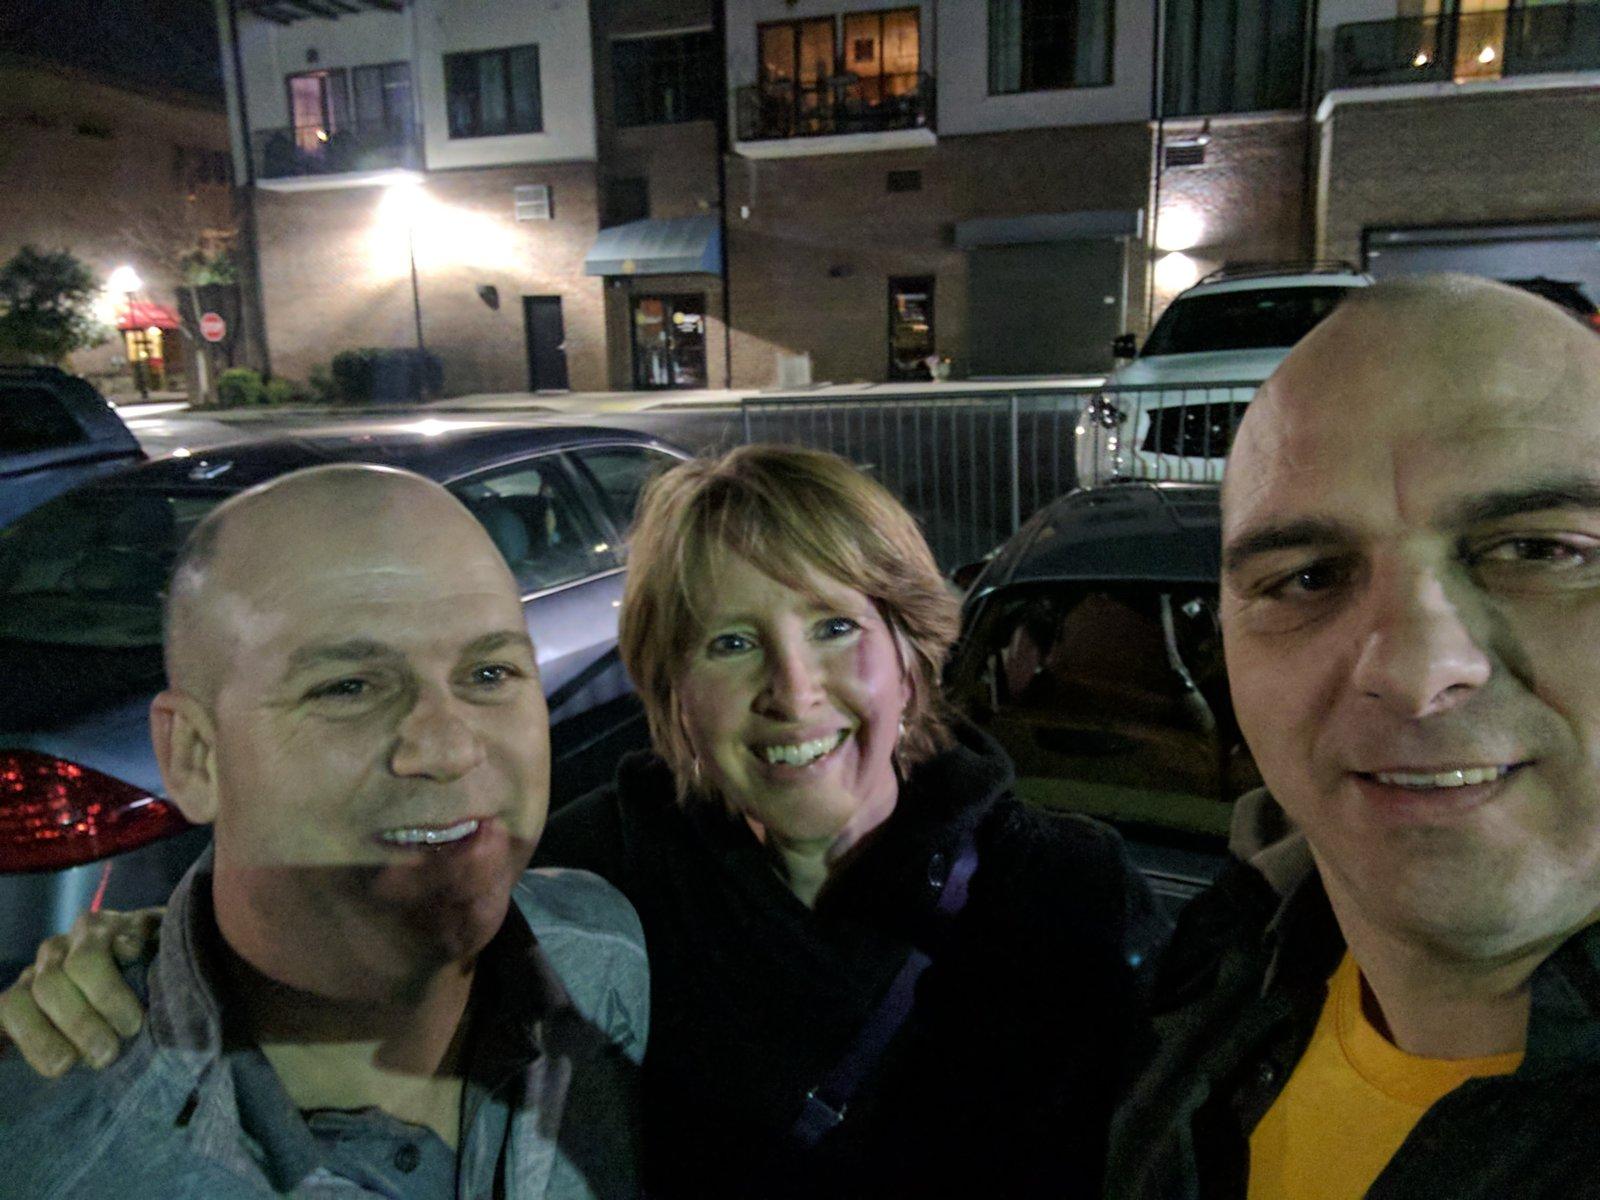 We did meet up for dinner with this guy. We all have a lot less hair than the wedding day, but still love being together.